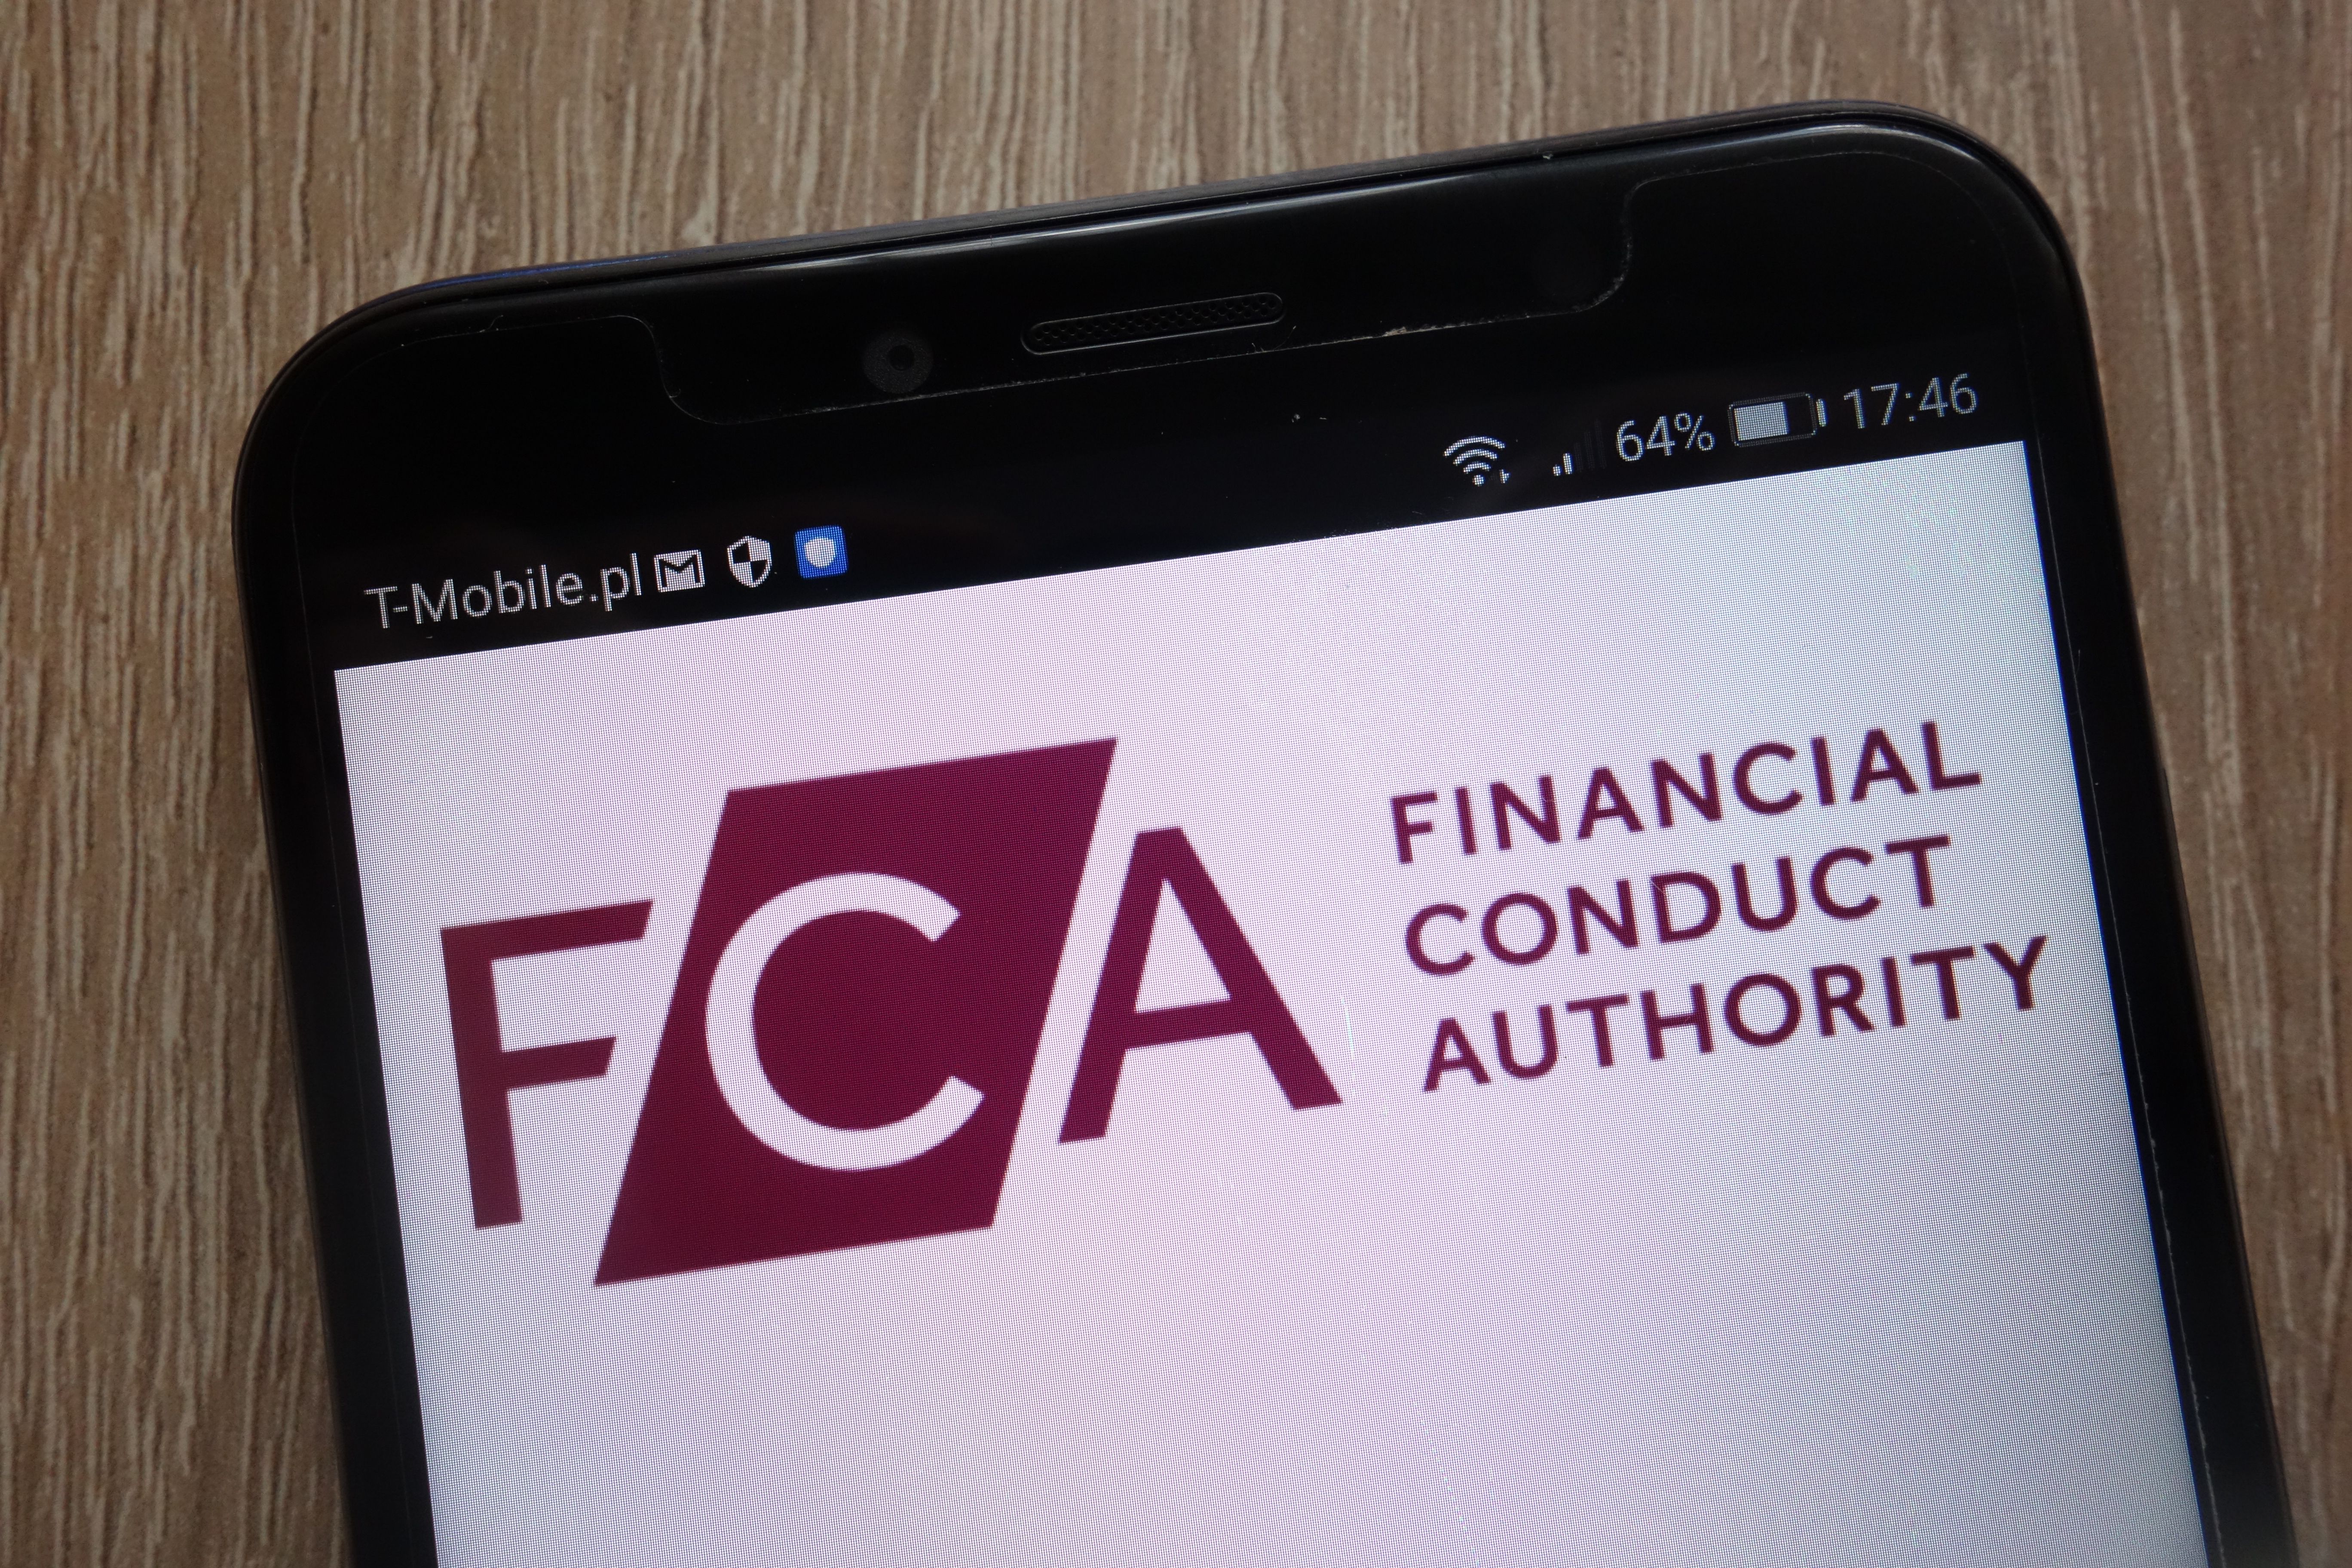 /fca-plans-to-expand-its-money-laundering-crimes-oversight-and-now-includes-crypto-businesses-iu1m3xzy feature image